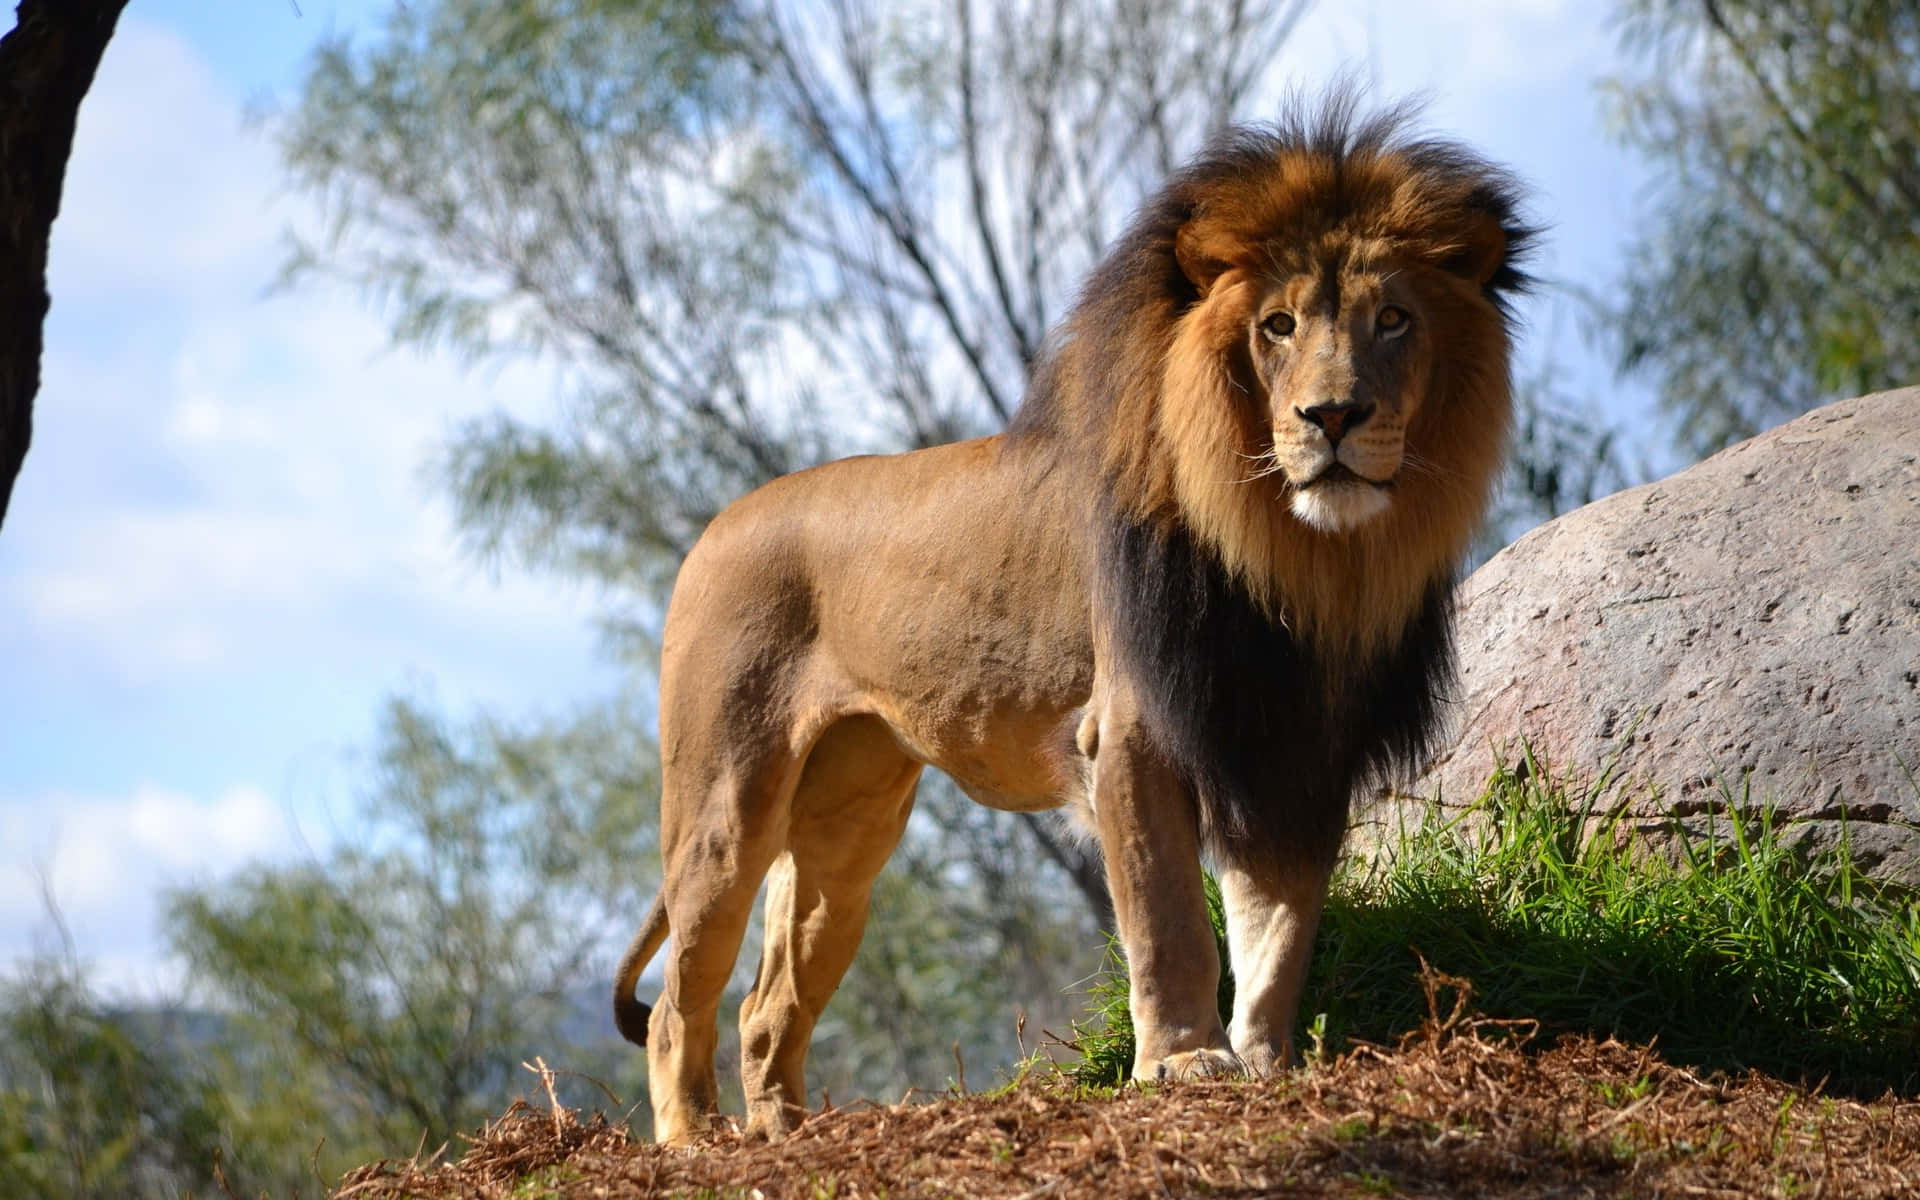 The King of the Jungle